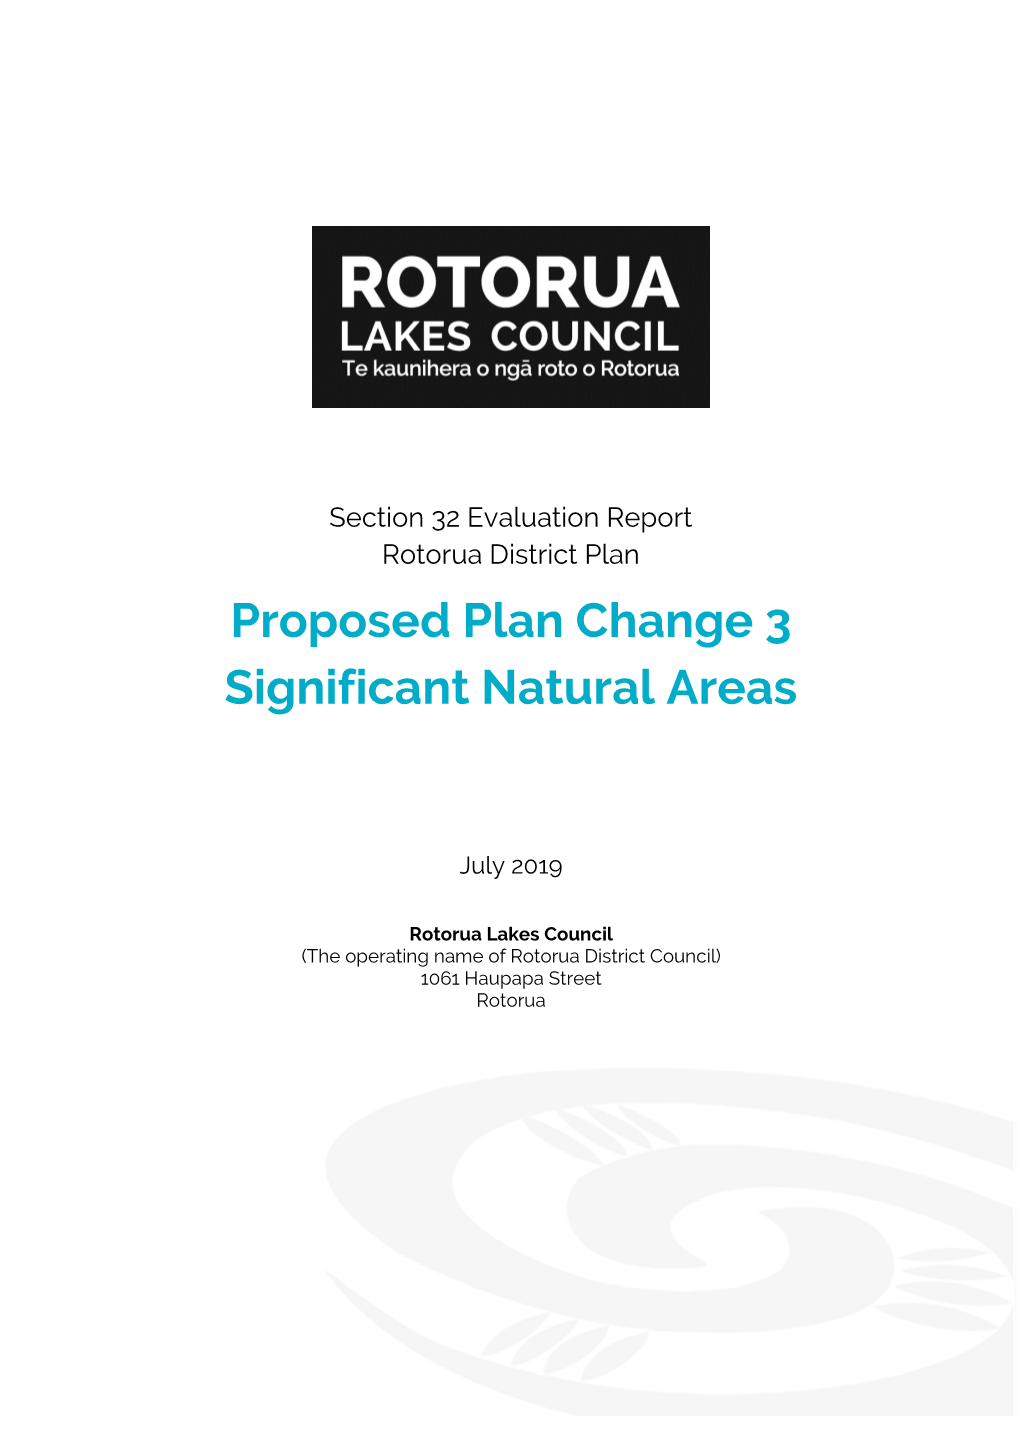 Proposed Plan Change 3 Significant Natural Areas